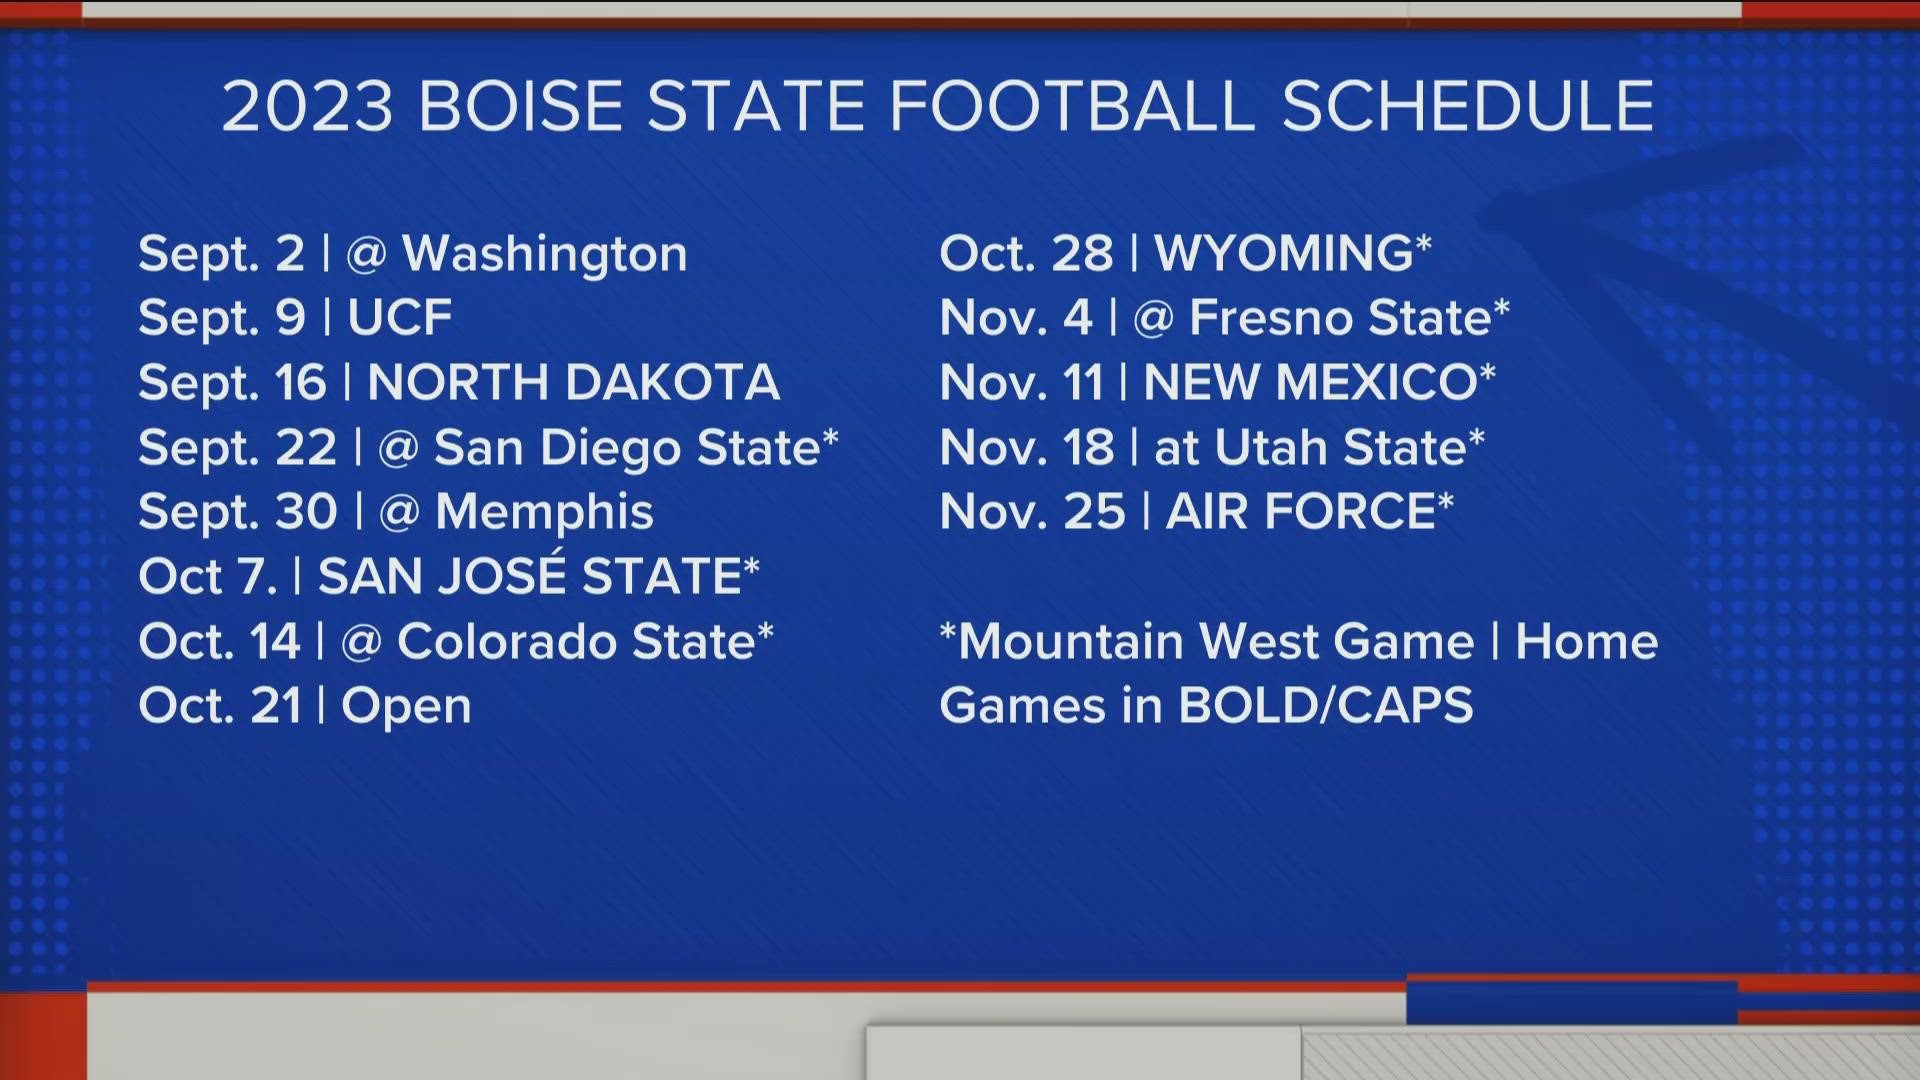 Air Force football television schedule announced - Air Force